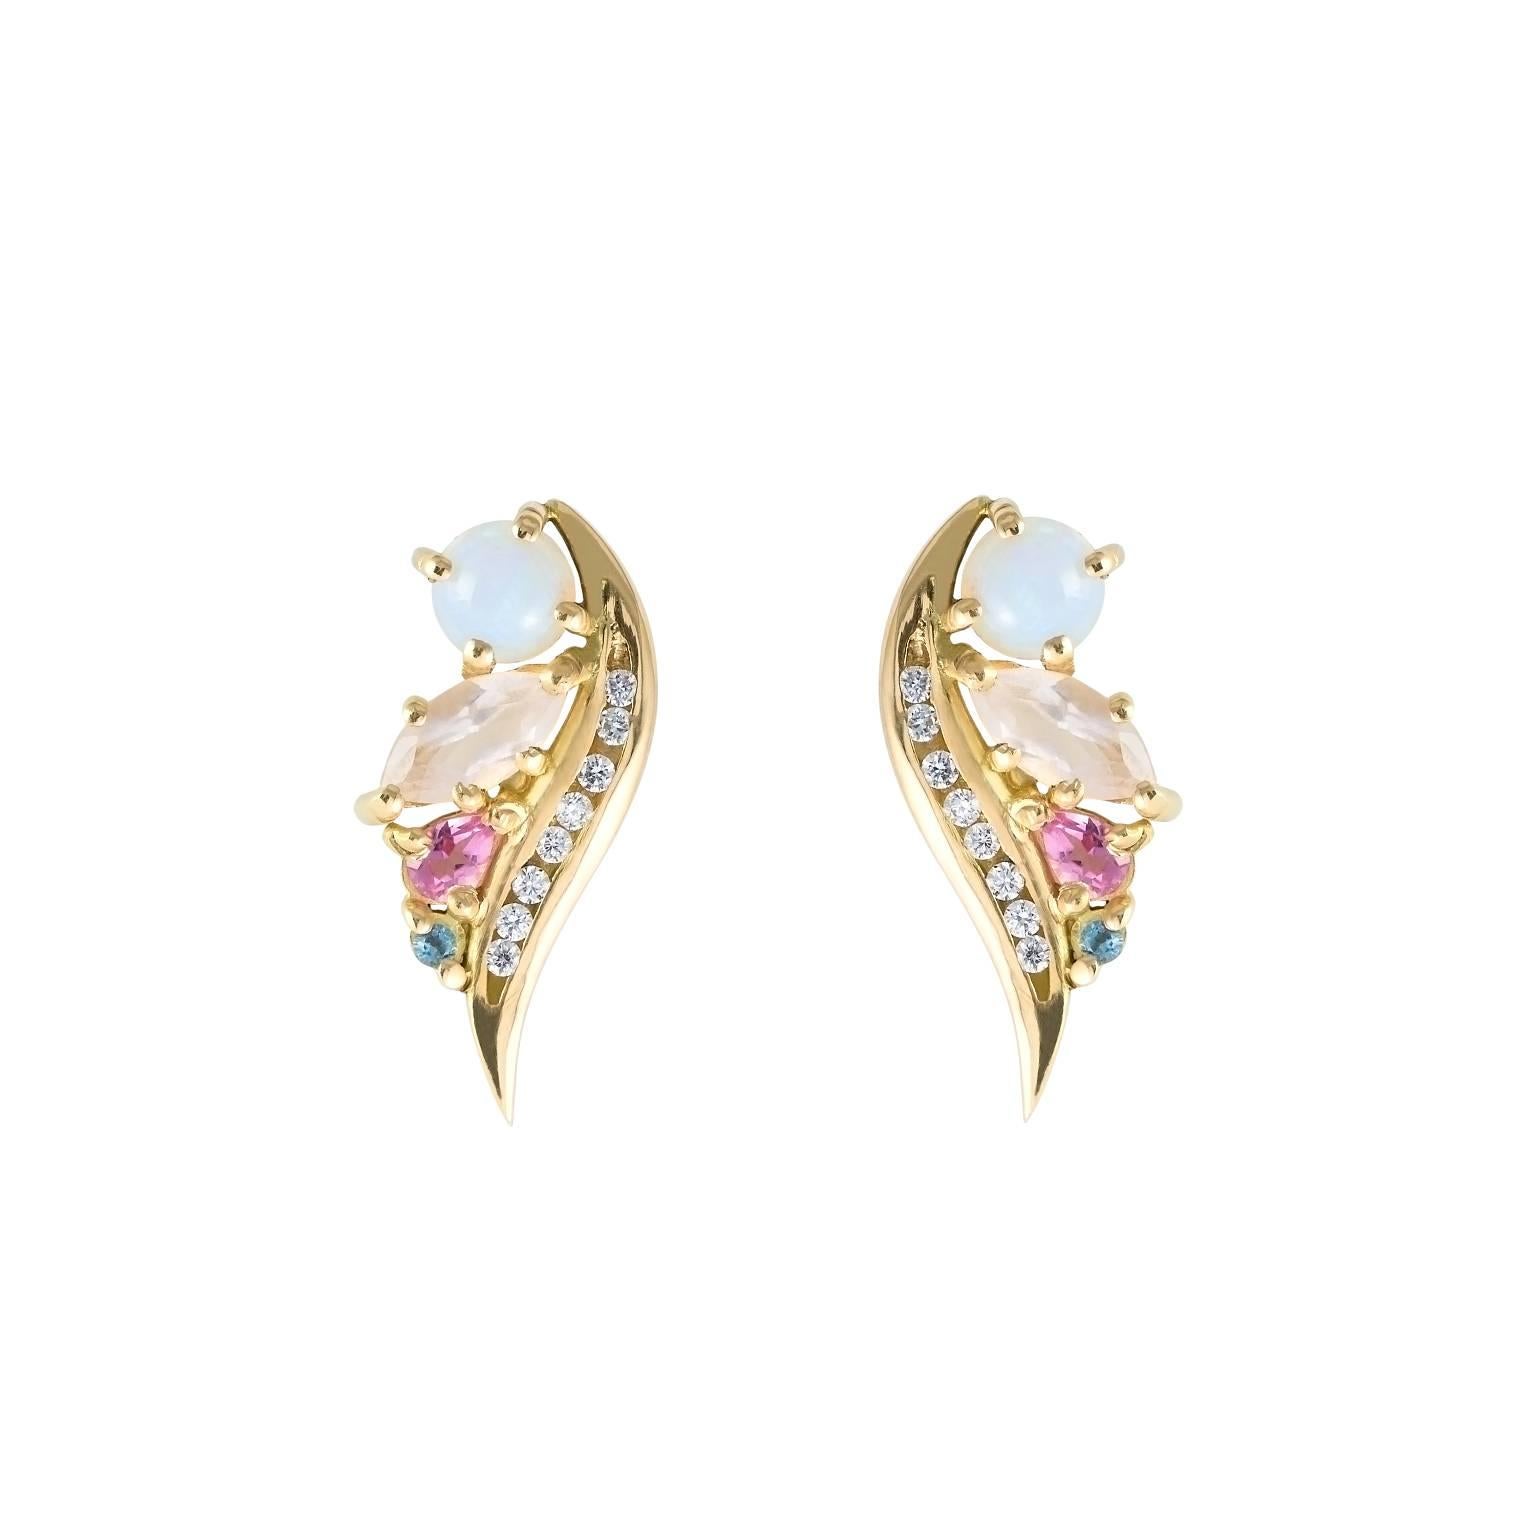 The Phoenix feather wing earrings are luminous and delightfully feminine jewelry piece in an Art Nouveau romantic style and contemporary pastel colour palette. Juxtaposing varied cut coloured gemstones perfectly suited in tone with a sleek feather